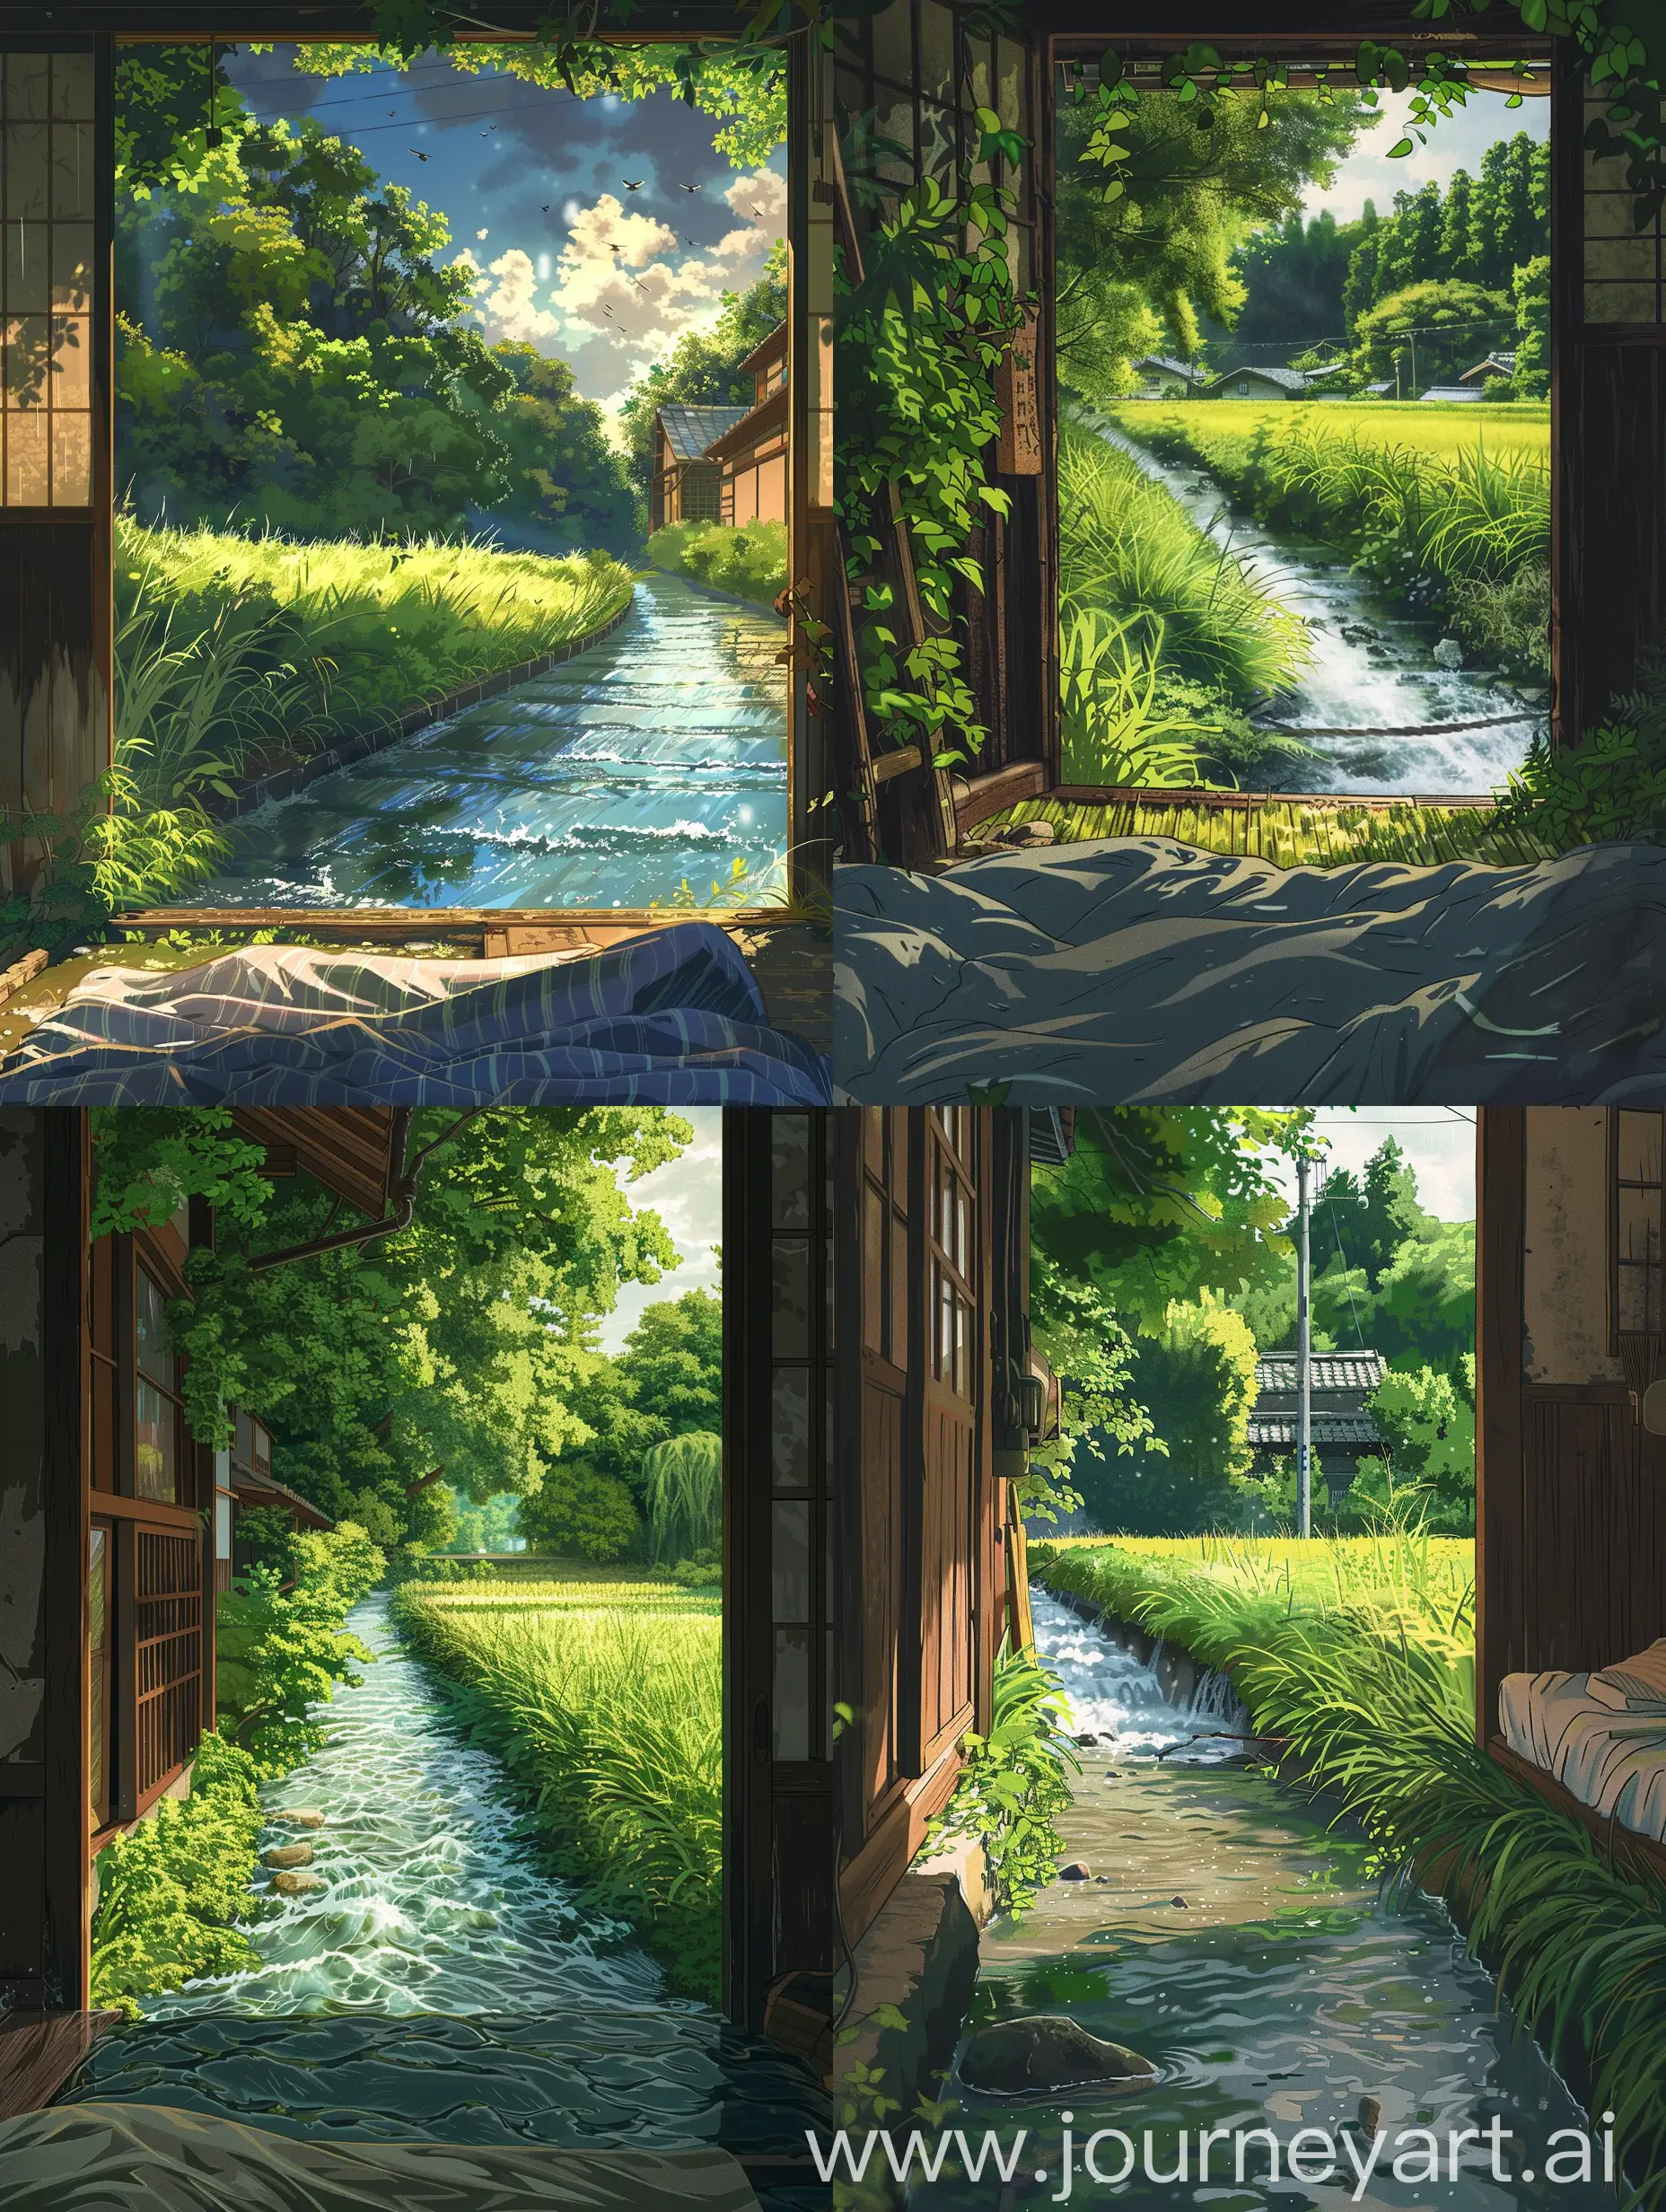 Makato shinkai anime style,beautiful textures,a view from a room door,a beautiful area where the water is flowing in a line which is little wide but long,some grass,behind this water there is a  greenery with beautiful leaves,beautiful leaves covering,beautiful trees,summers,beautiful sky,in room there is some basic stuff,just a small bed,its a village side,its should be image which relax the mind and should be giving some peaceful vibes emerging in nature.